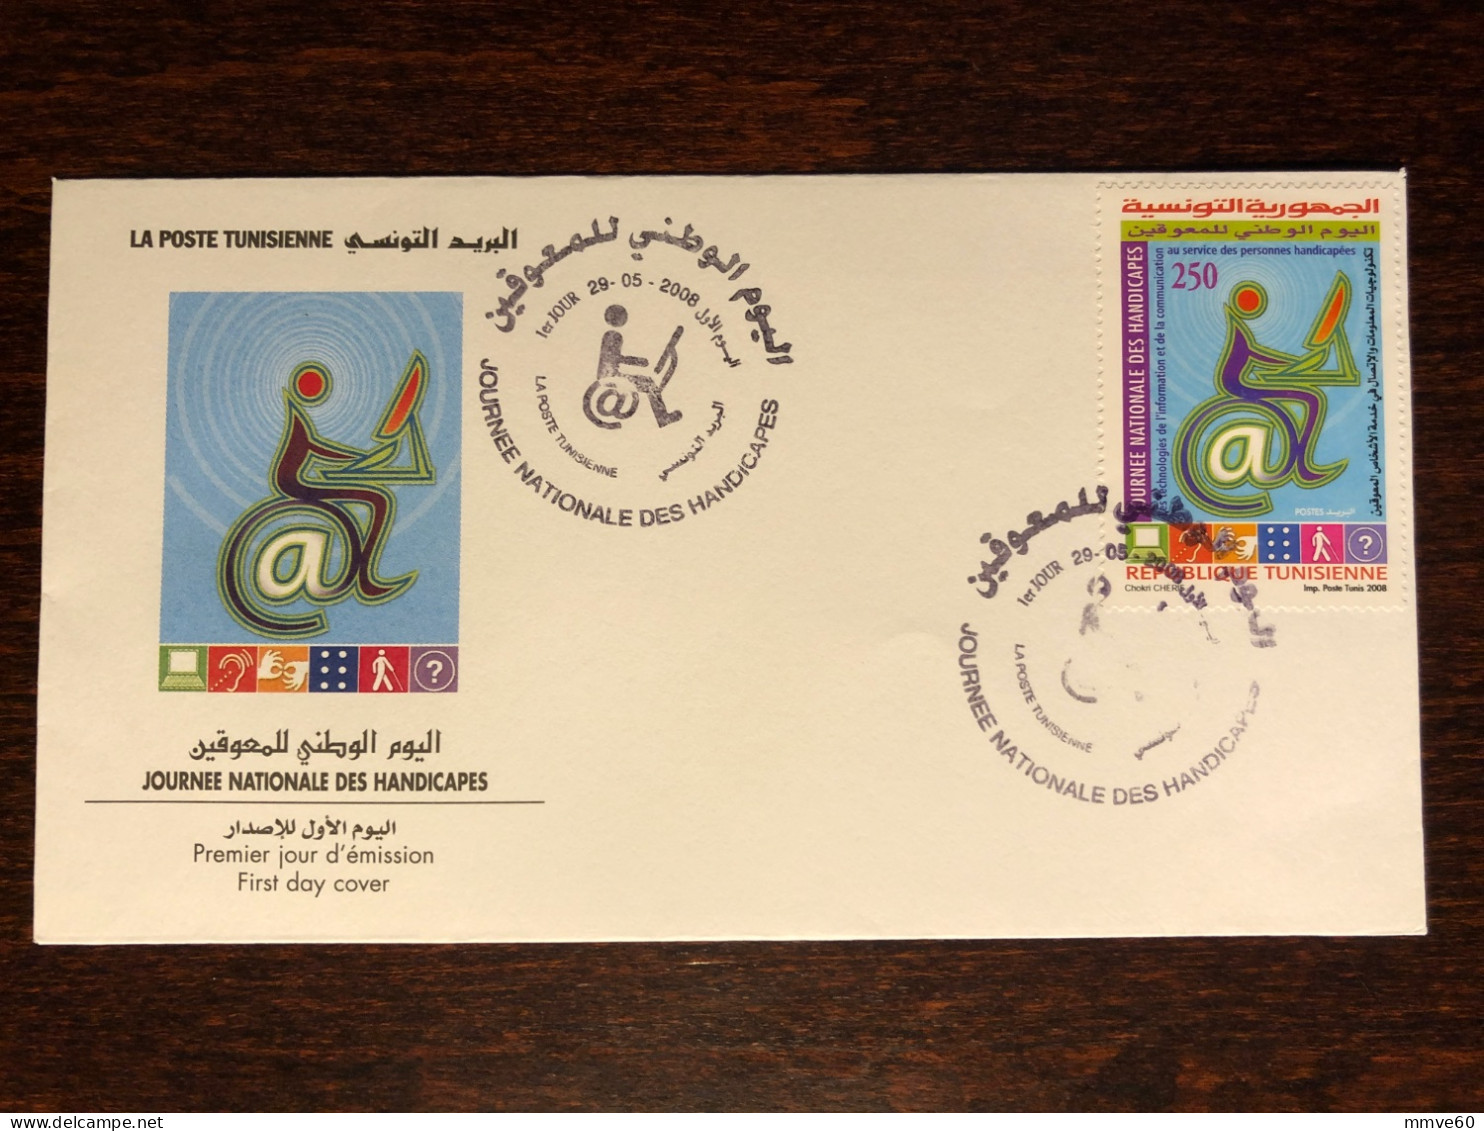 TUNISIA TUNISIE FDC COVER 2008 YEAR DISABLED PEOPLE HEALTH MEDICINE STAMPS - Tunisia (1956-...)